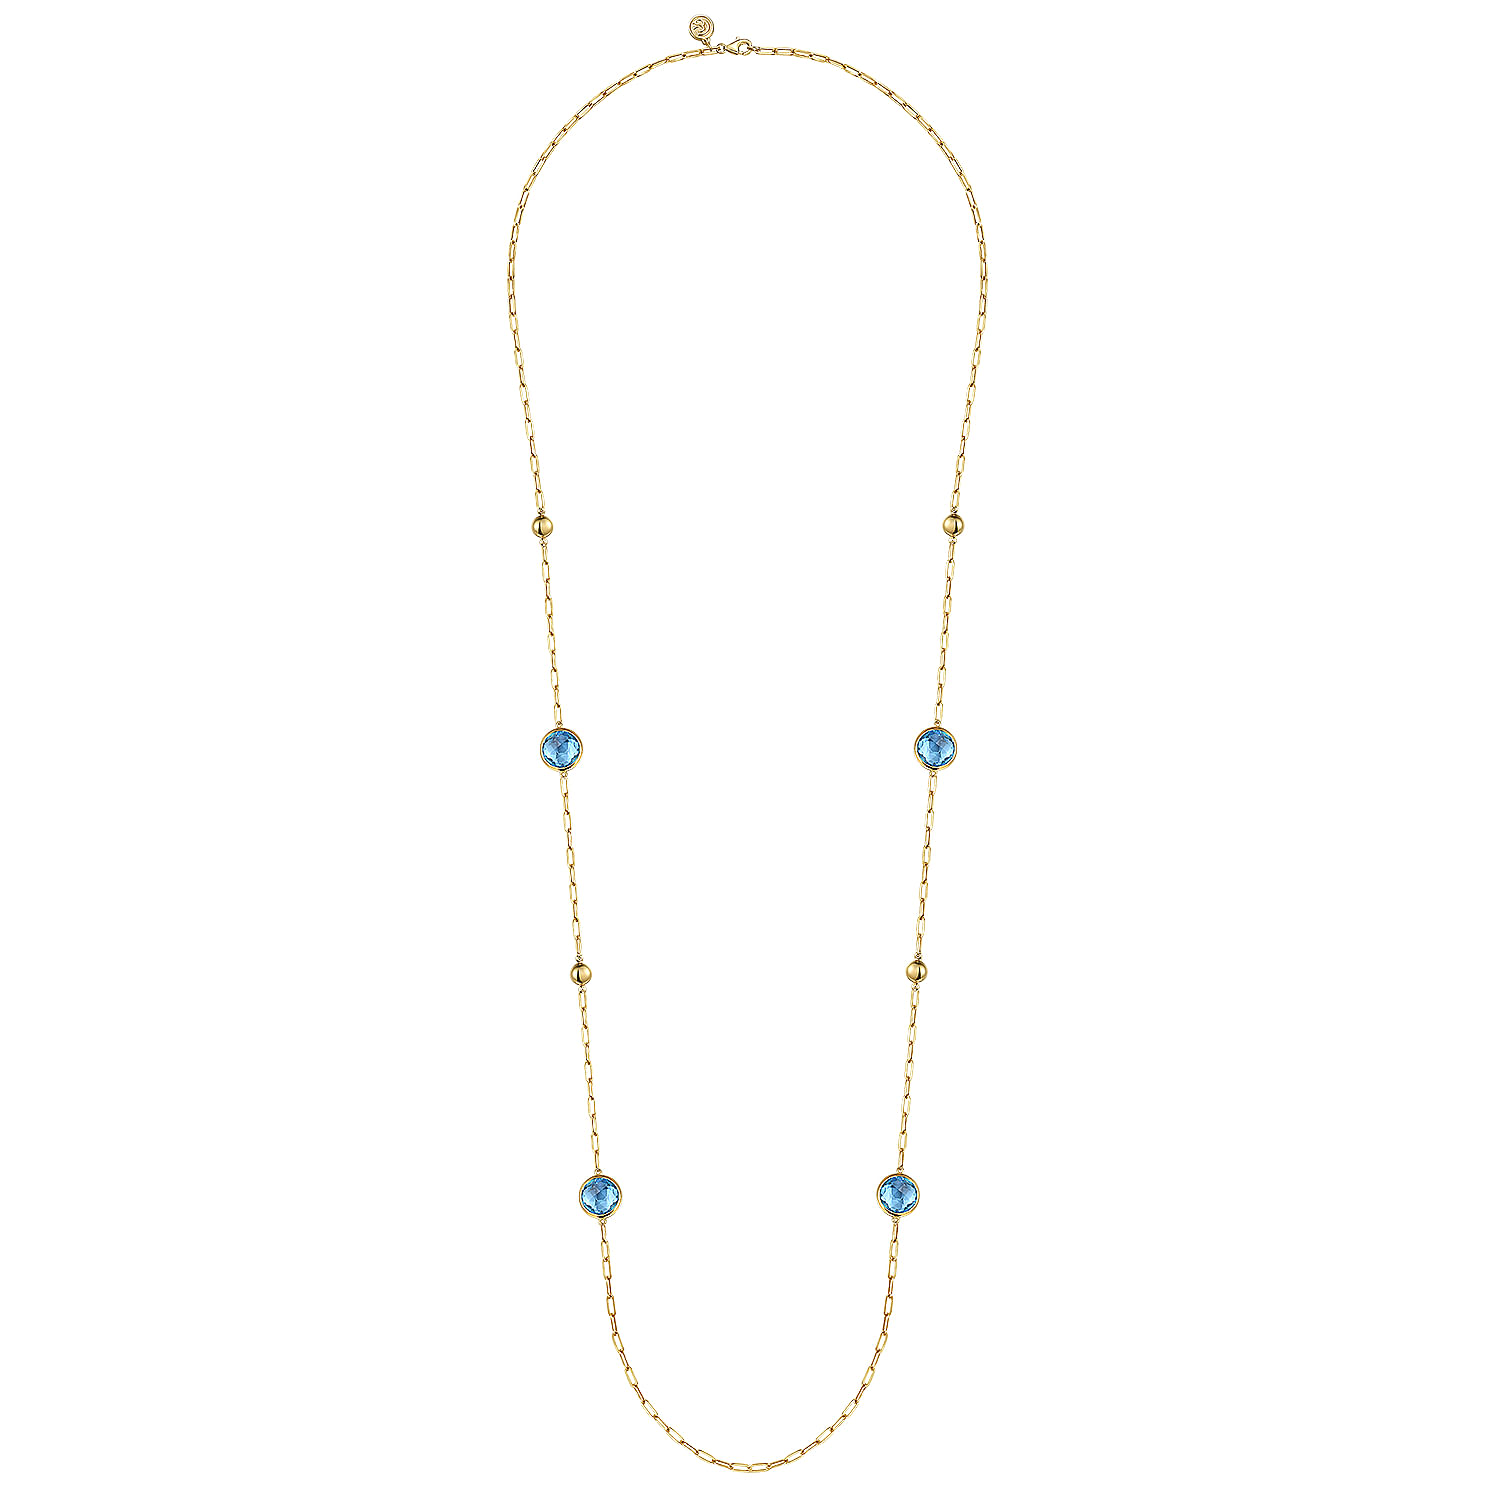 14K Yellow Gold Blue Topaz Round Shape Necklace With Four Stations ,Beads and Bezel Setting